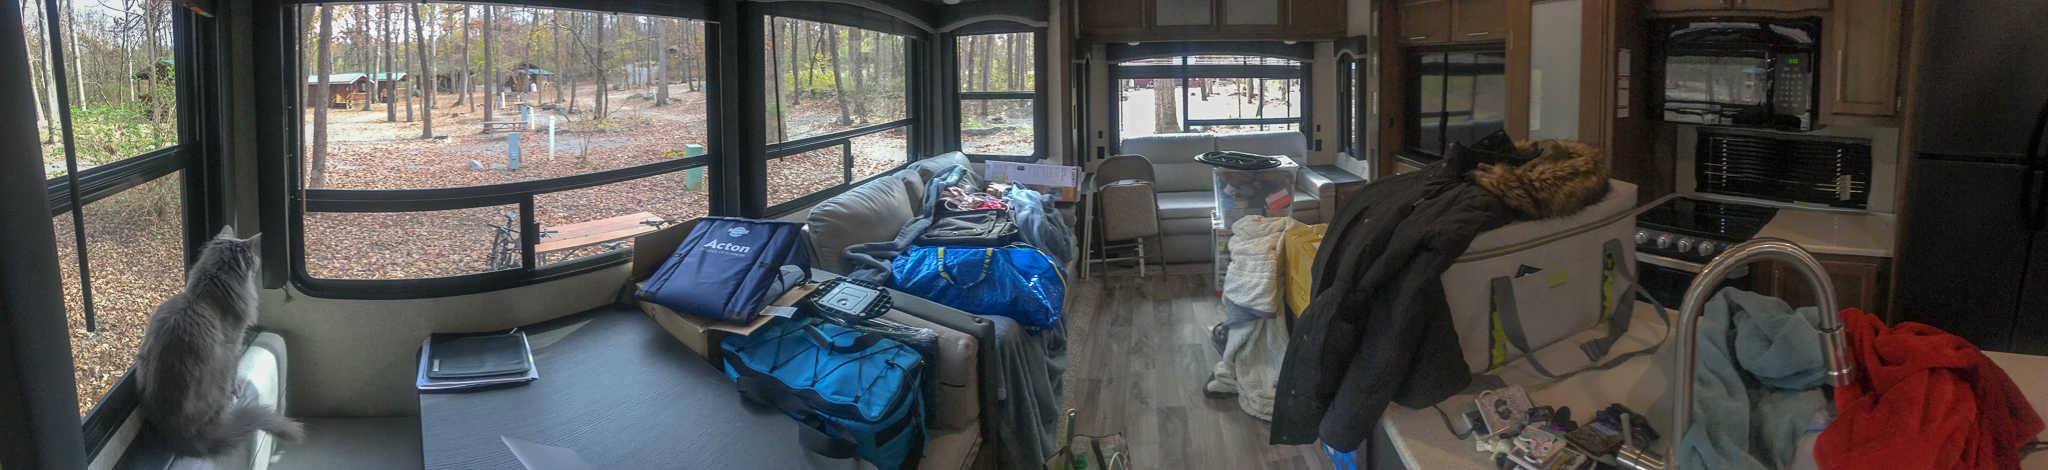 Sorting our life and things into a feww hundred square feet was a difficult part of adjusting to RV life